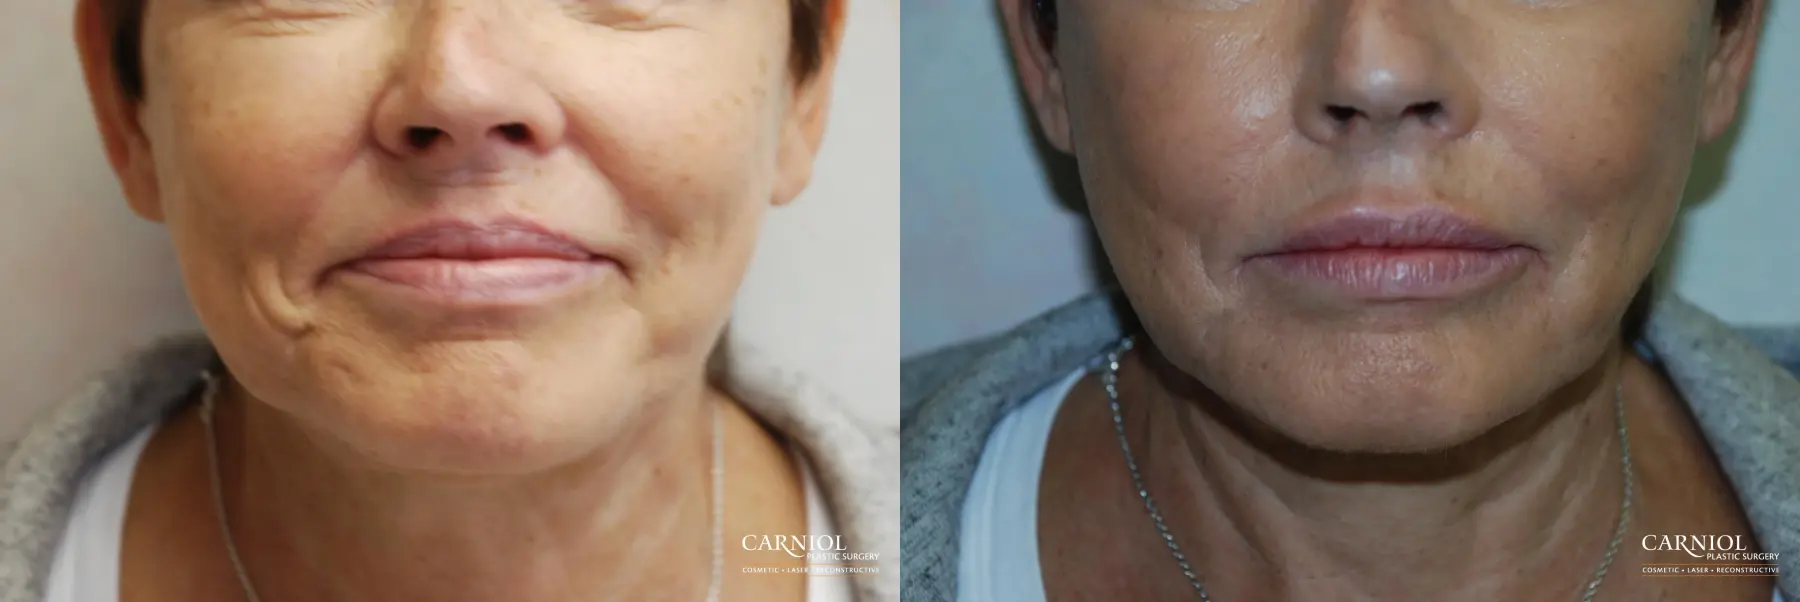 Lip Augmentation: Patient 4 - Before and After 1